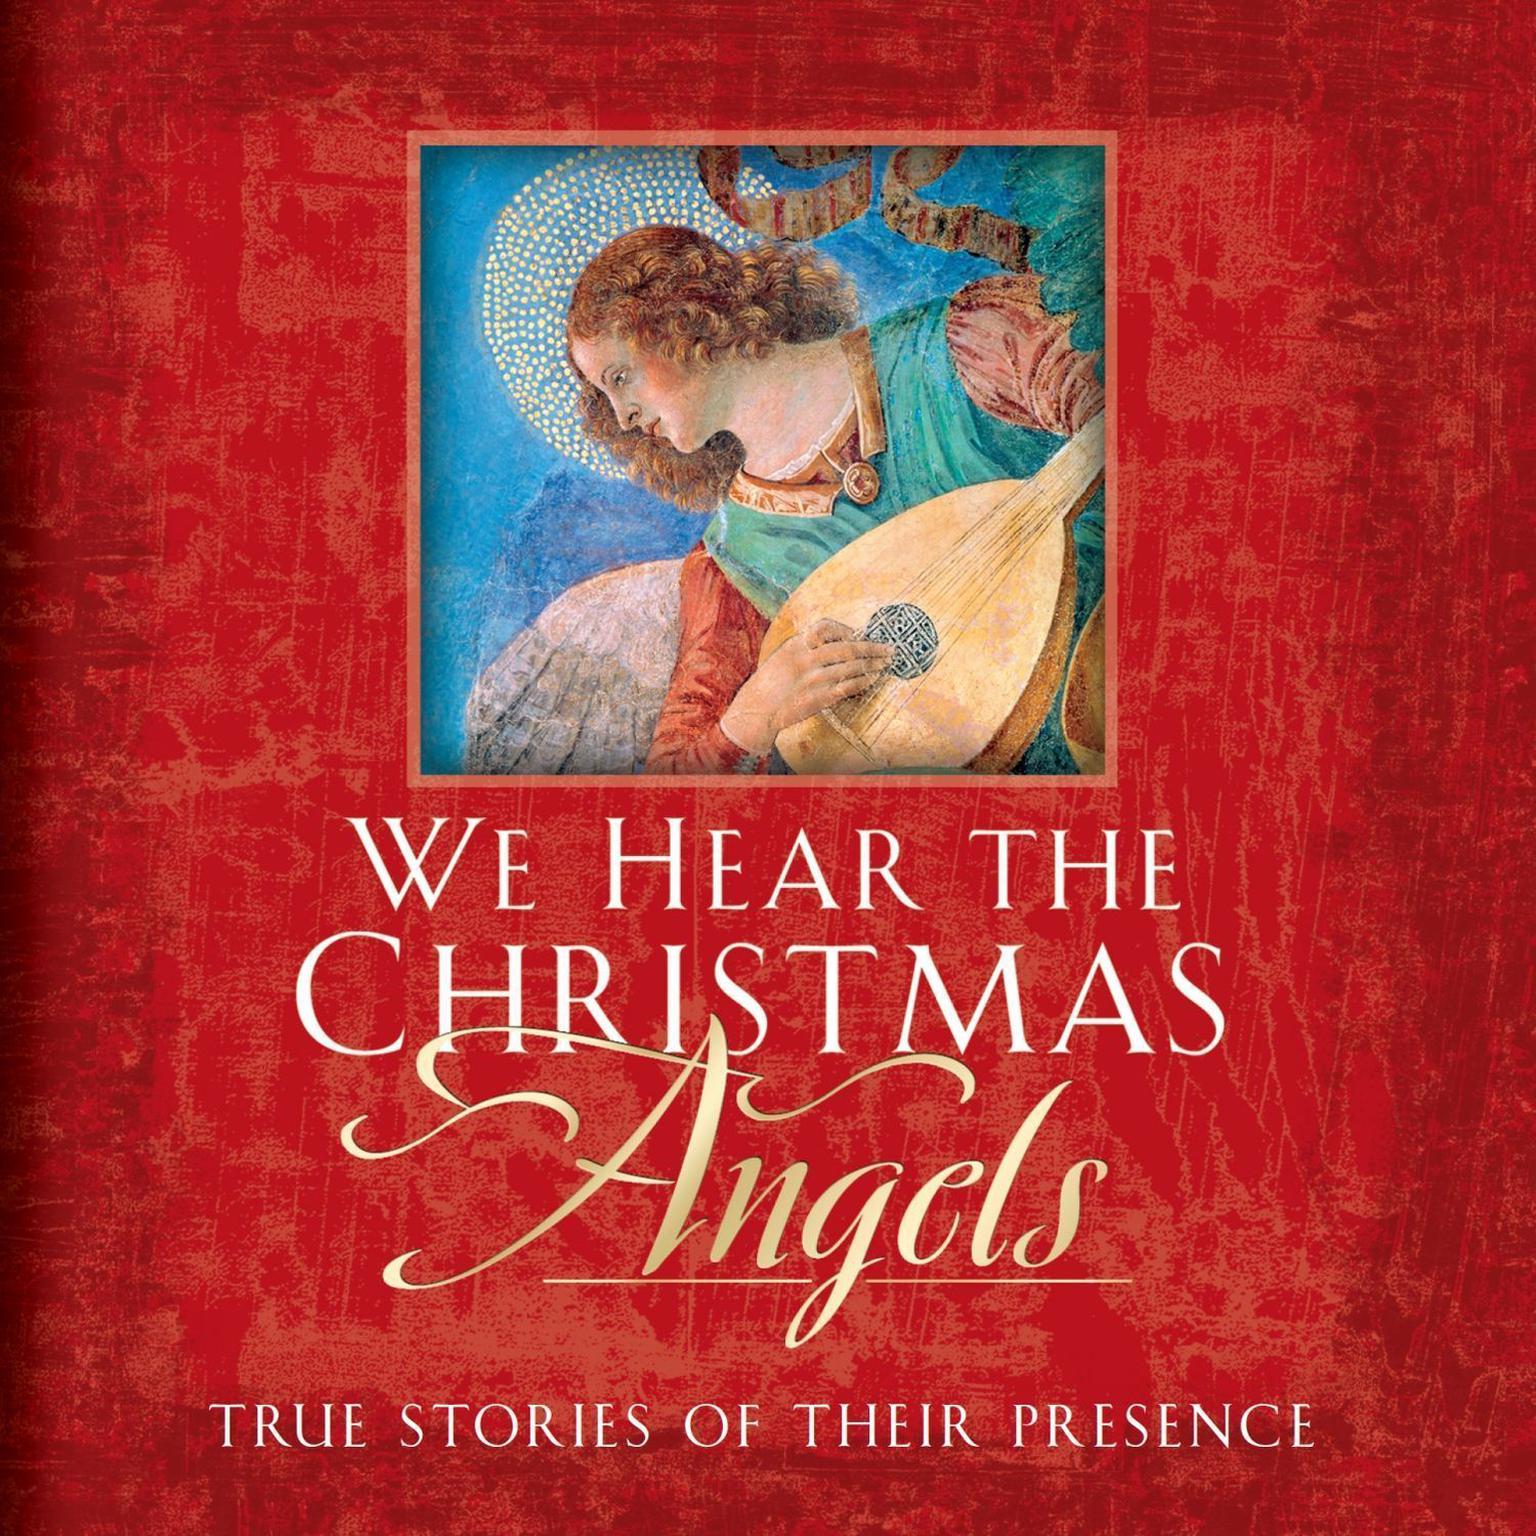 We Hear the Christmas Angels (Abridged): True Stories of Their Presence Audiobook, by Evelyn Bence